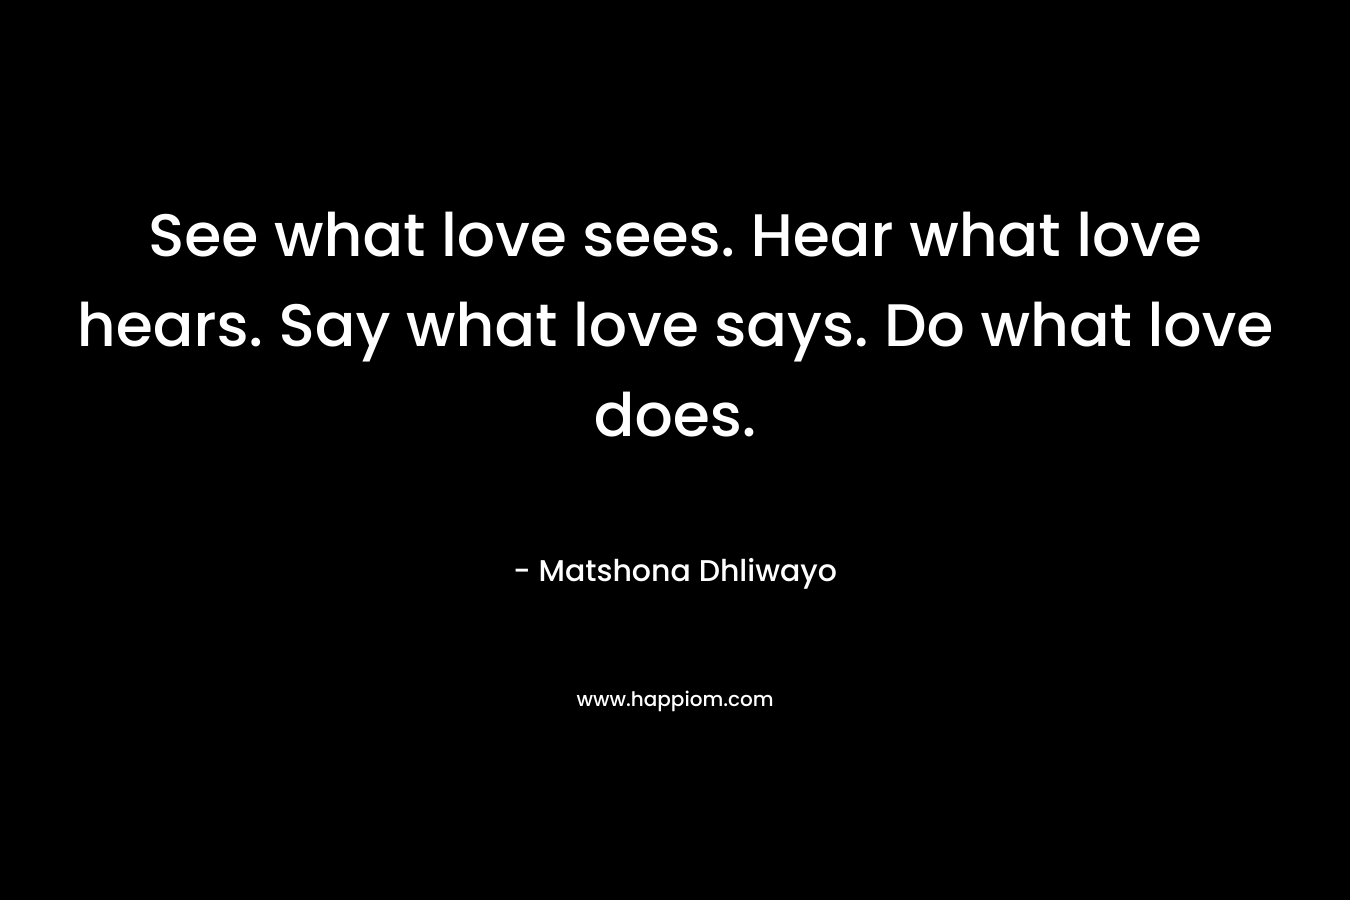 See what love sees. Hear what love hears. Say what love says. Do what love does.